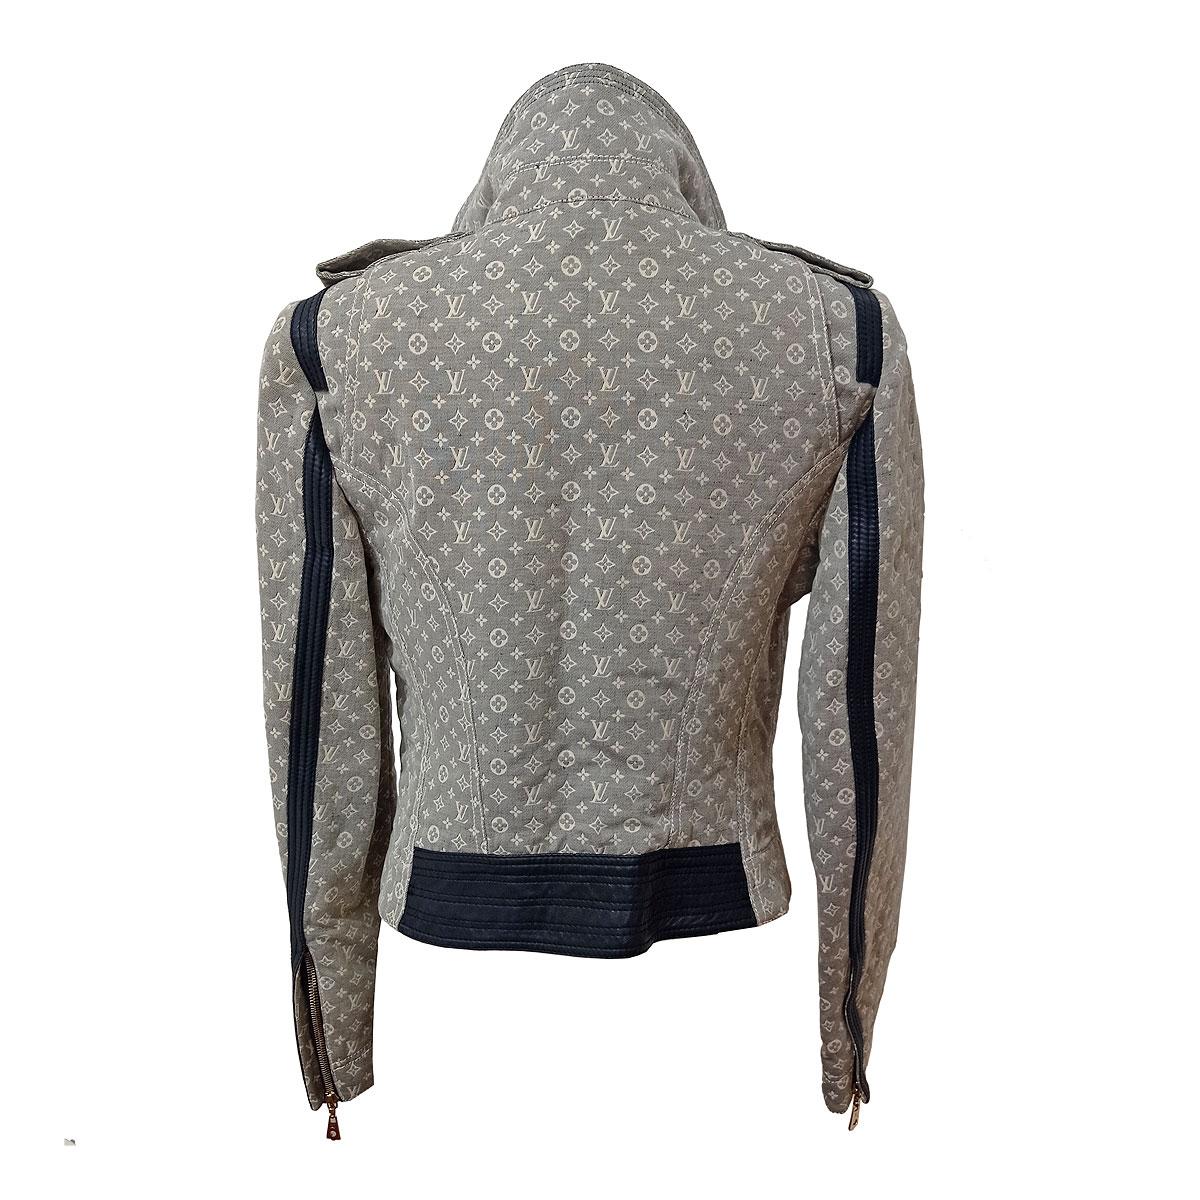 Beautiful and chic Louis Vuitton cotton jacket
Cotton (58%), linen (24%) and nylon
Grey color
Blue lamb leather inserts
Zip closure
Three pockets
Length shoulder/hem cm 46 (18,1 inches)
Shoulder cm 38 (14,9 inches)
Worldwide express shipping